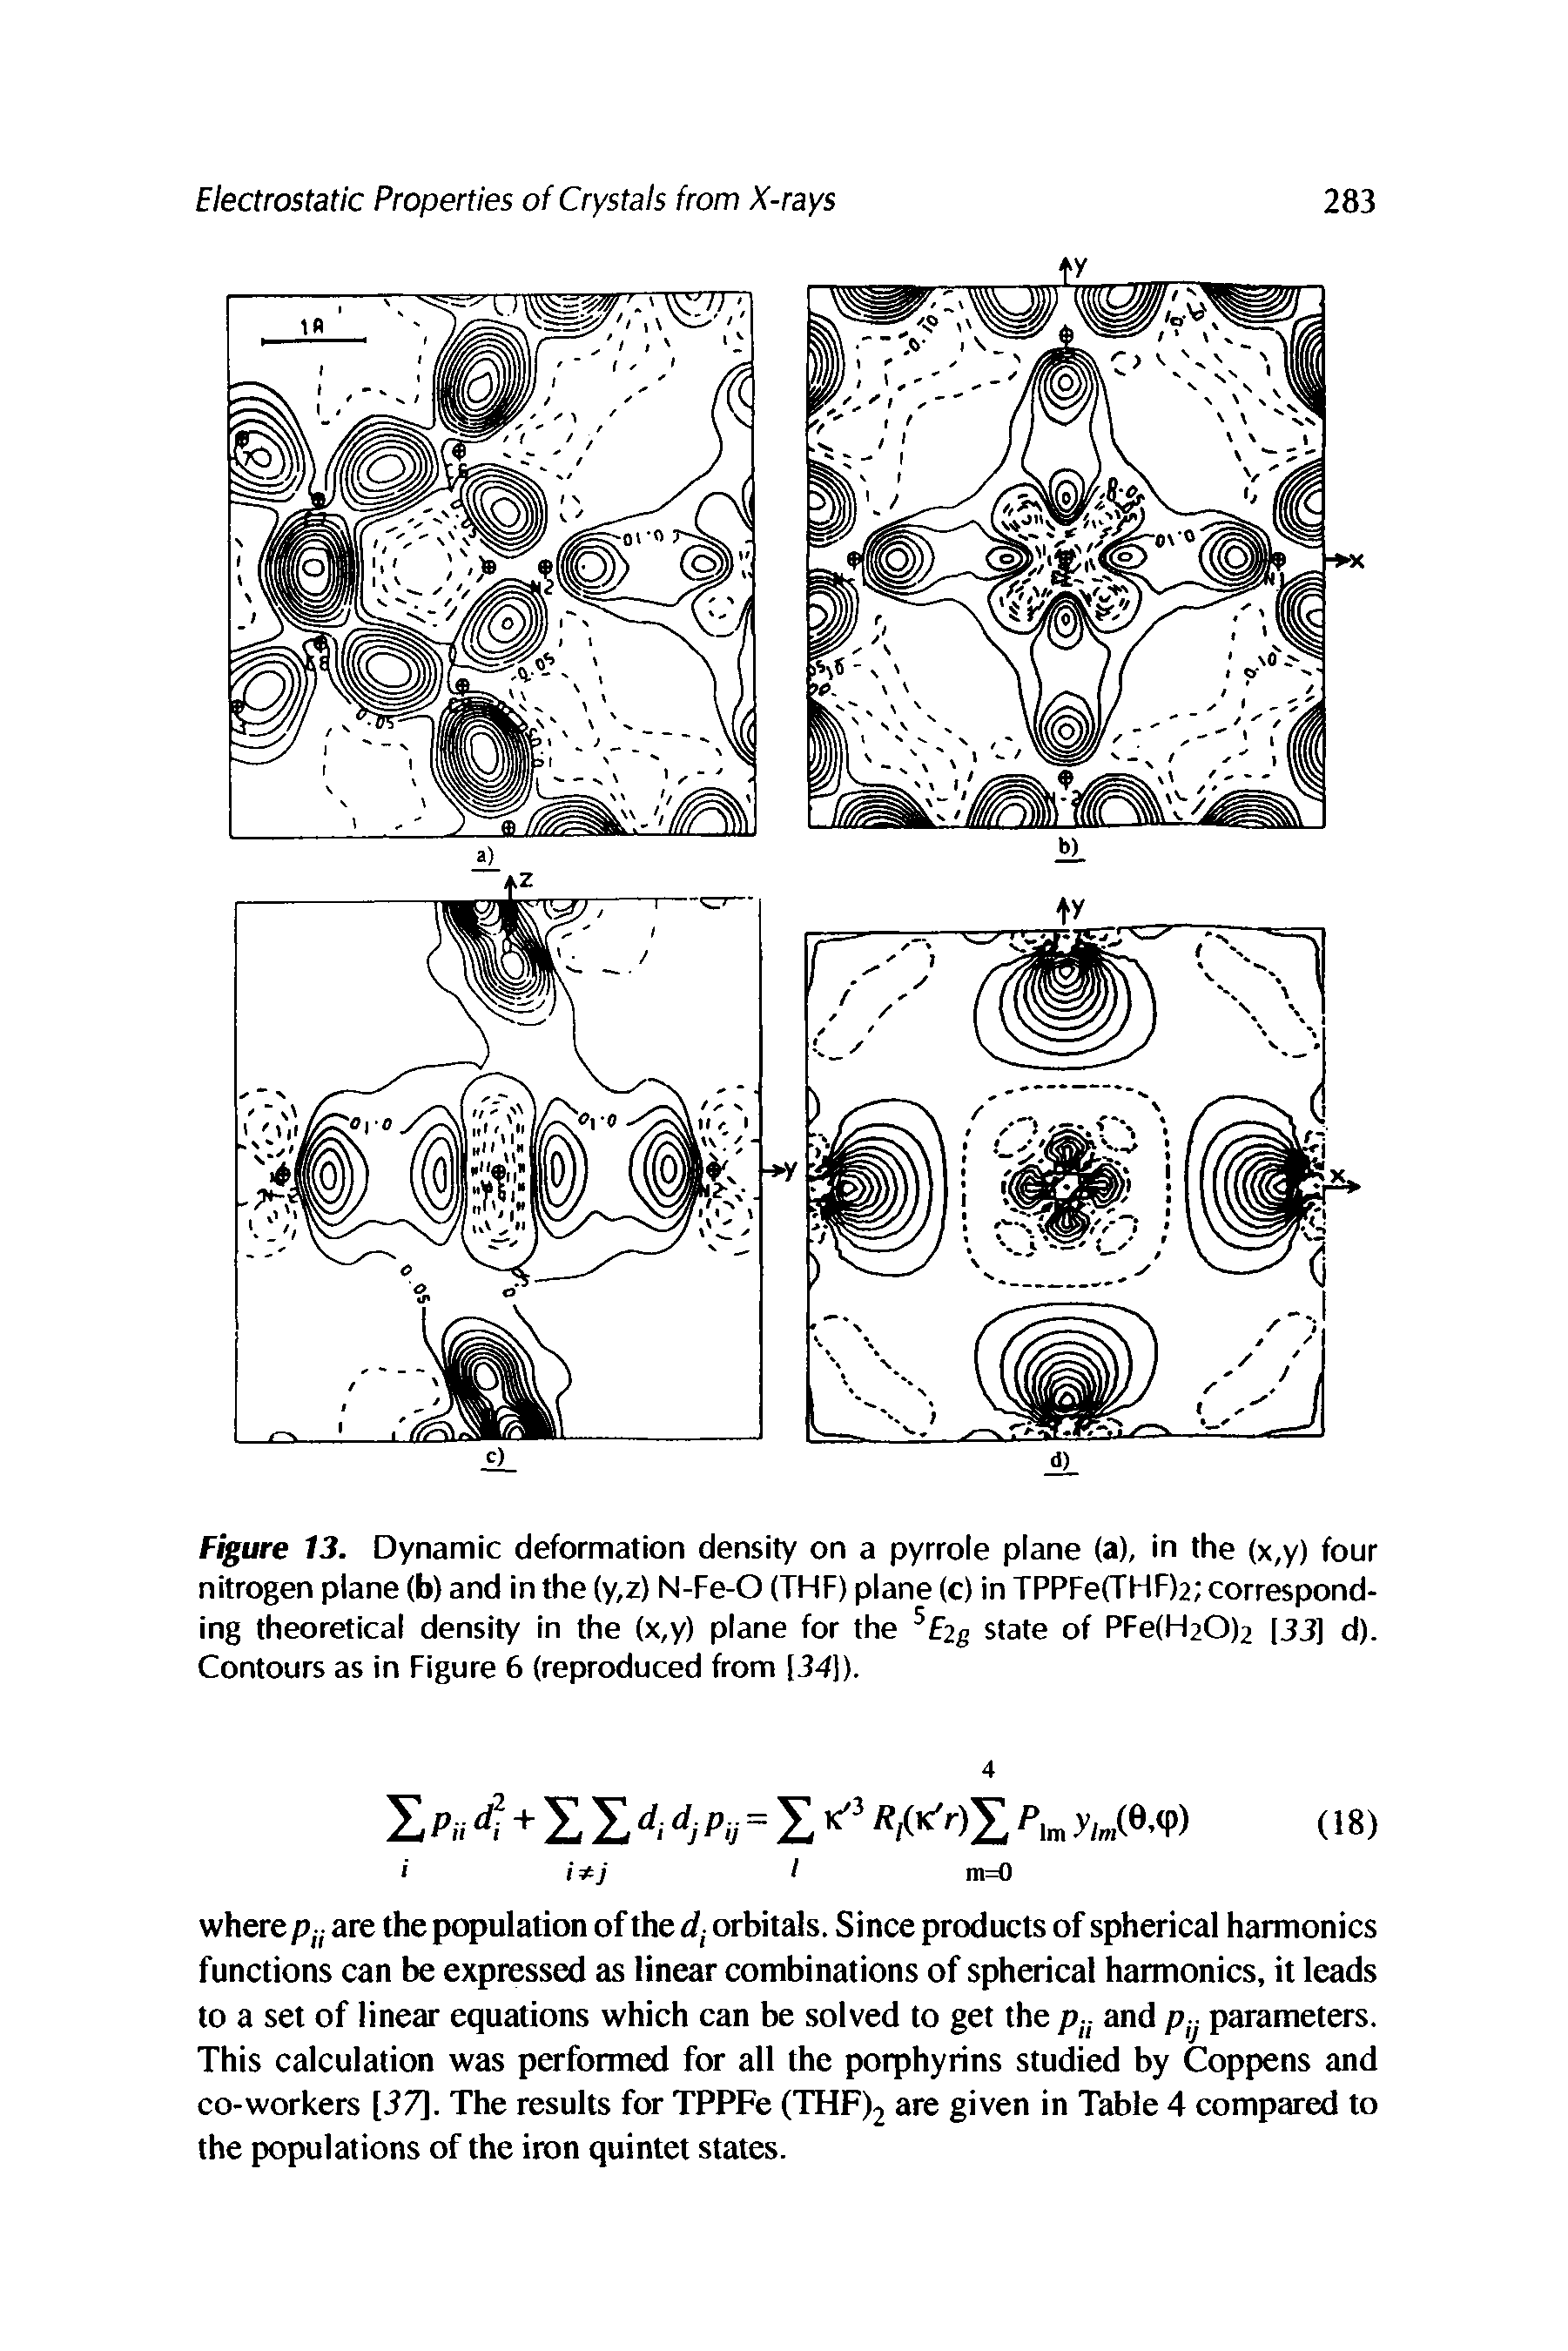 Figure 13. Dynamic deformation density on a pyrrole plane (a), in the (x,y) four nitrogen plane (b) and in the (y,z) N-Fe-O (THF) plane (c) in TPPFedHFte corresponding theoretical density in the (x,y) plane for the 5E2g state of PFe(H20)2 [33] d). Contours as in Figure 6 (reproduced from [34]).